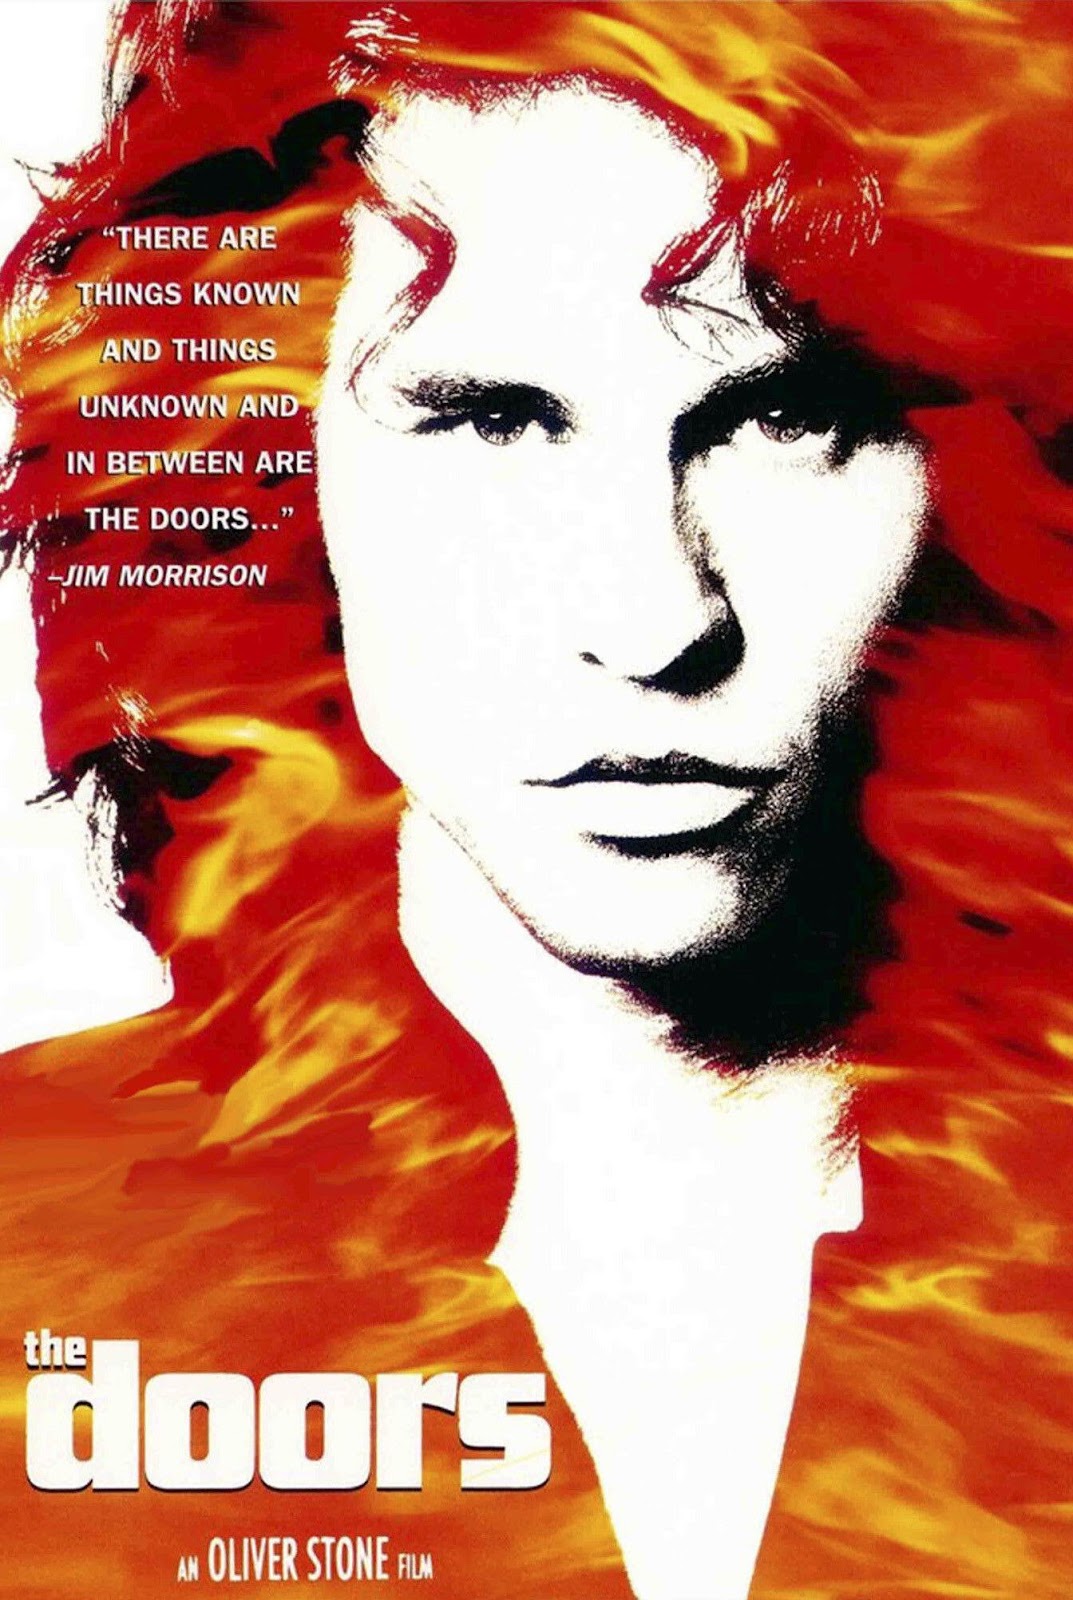 Poster for The Doors by Oliver Stone